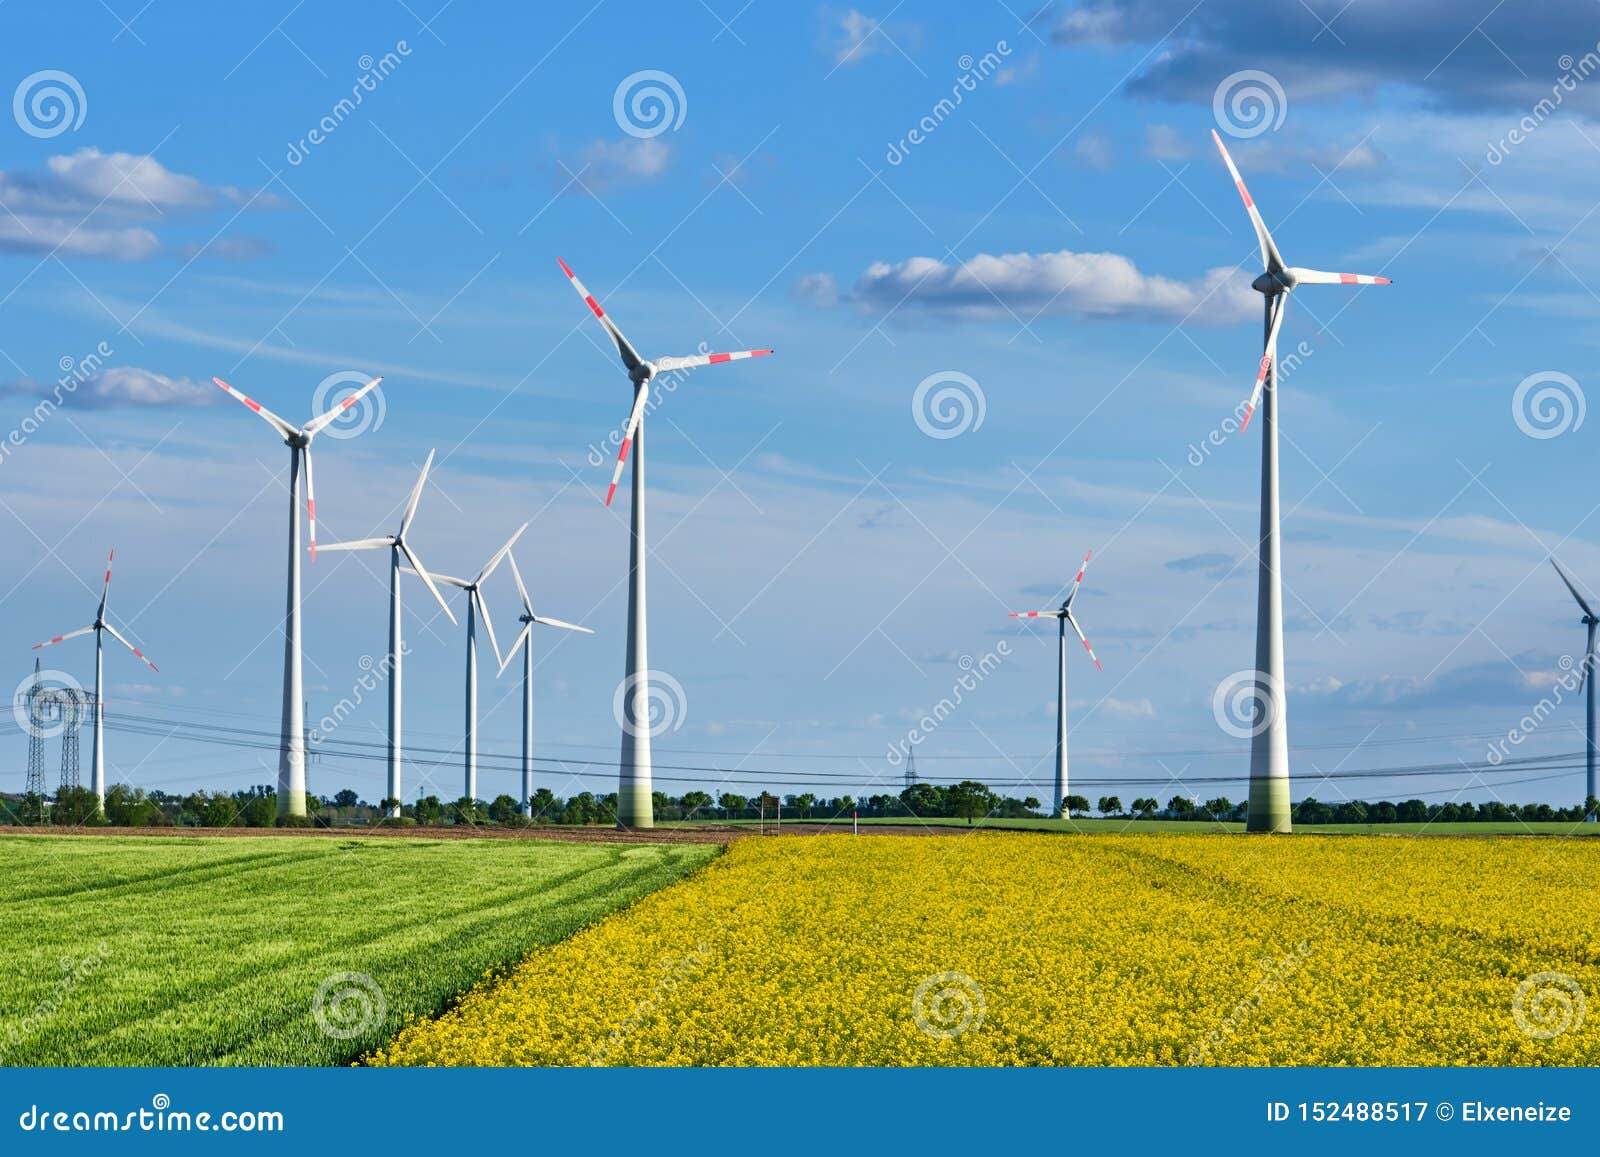 thriving rapeseed field with wind turbines and power lines